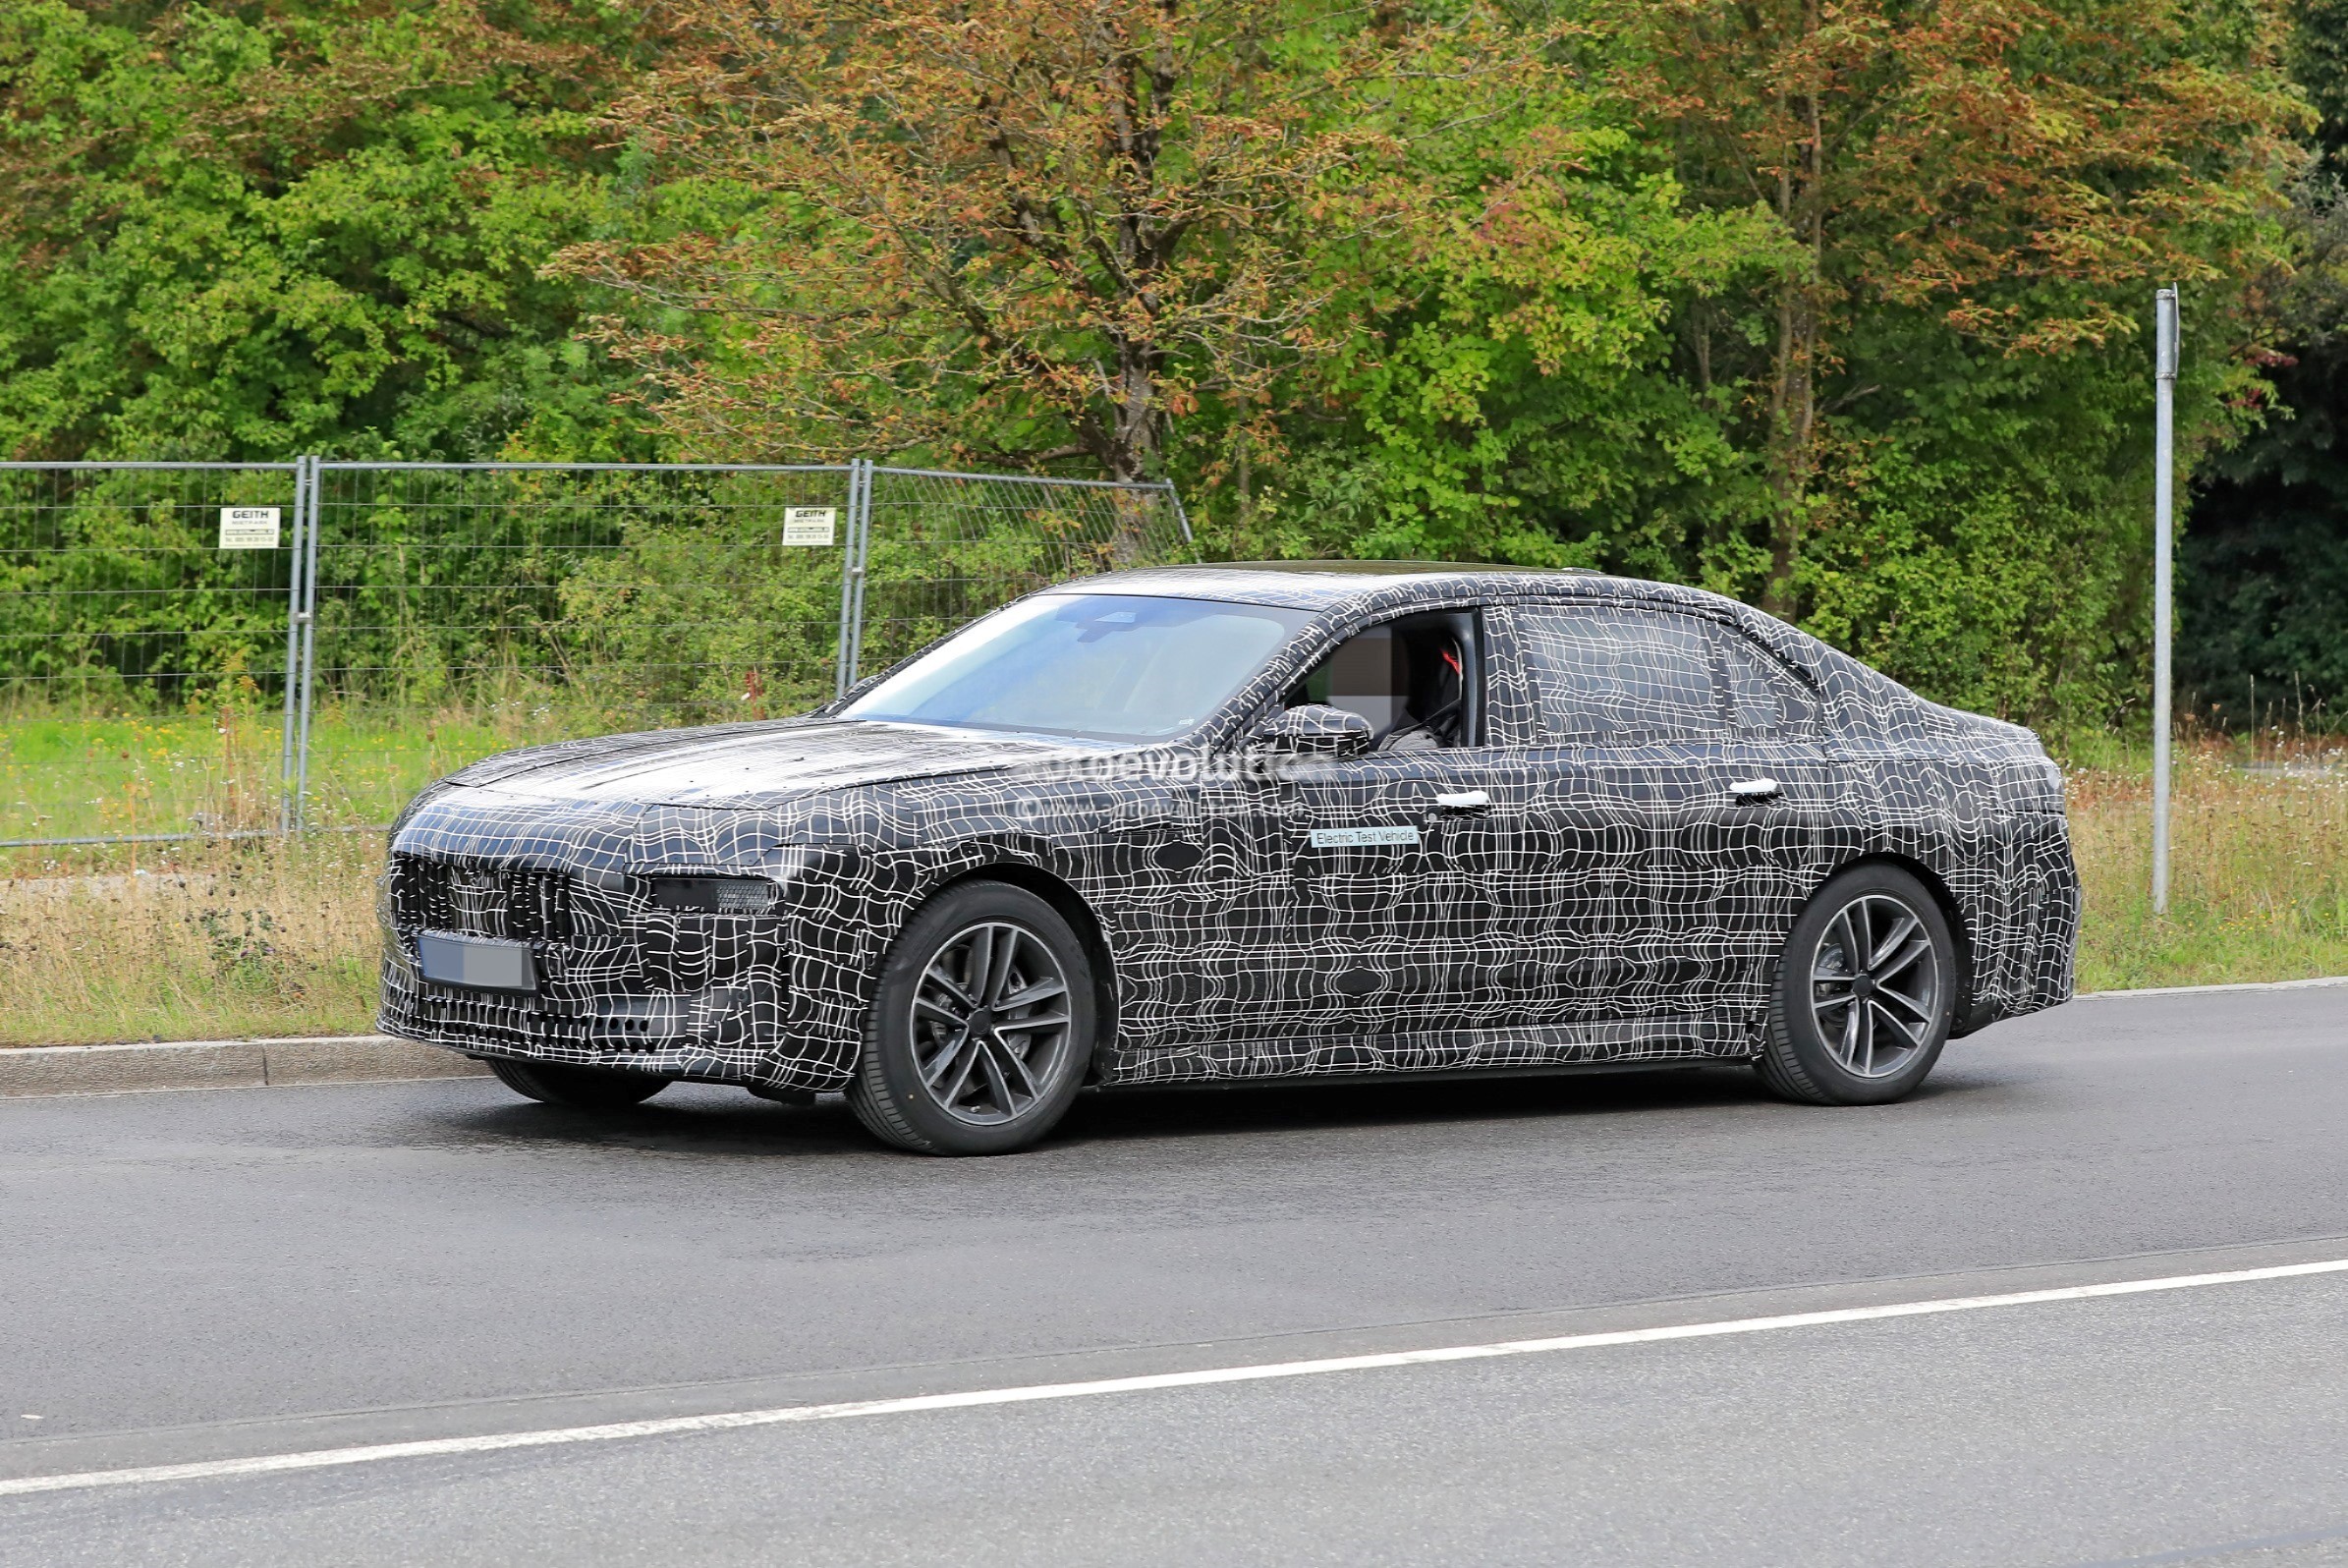 2022 Bmw 7 Series G70 Speculatively Rendered With Split Headlights